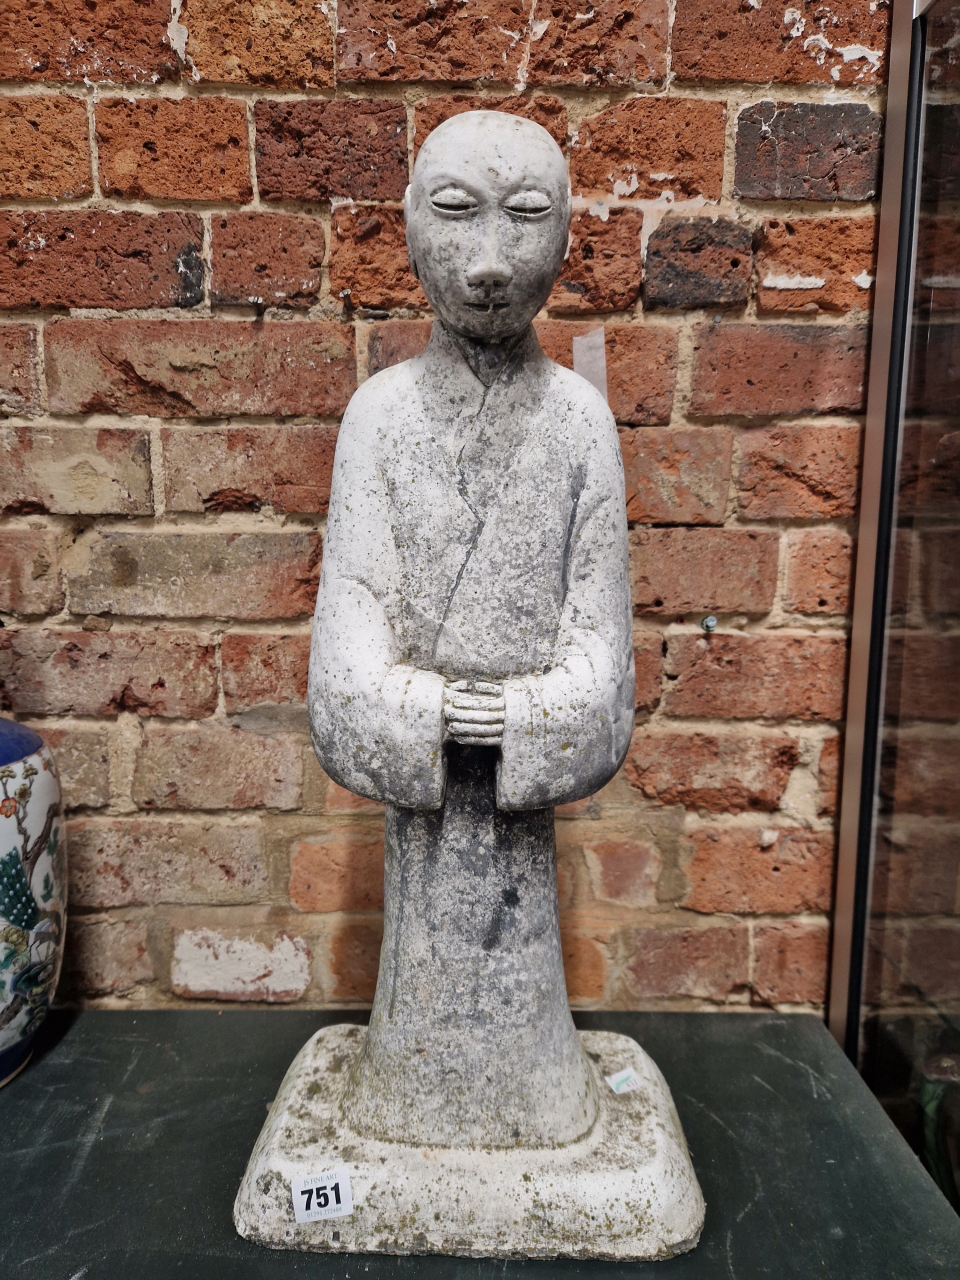 A COMPOSITION FIGURE OF A CHINESE MONK STANDING WITH HHIS HANDS CLASPED AT HIS WAIST. H 57cms.